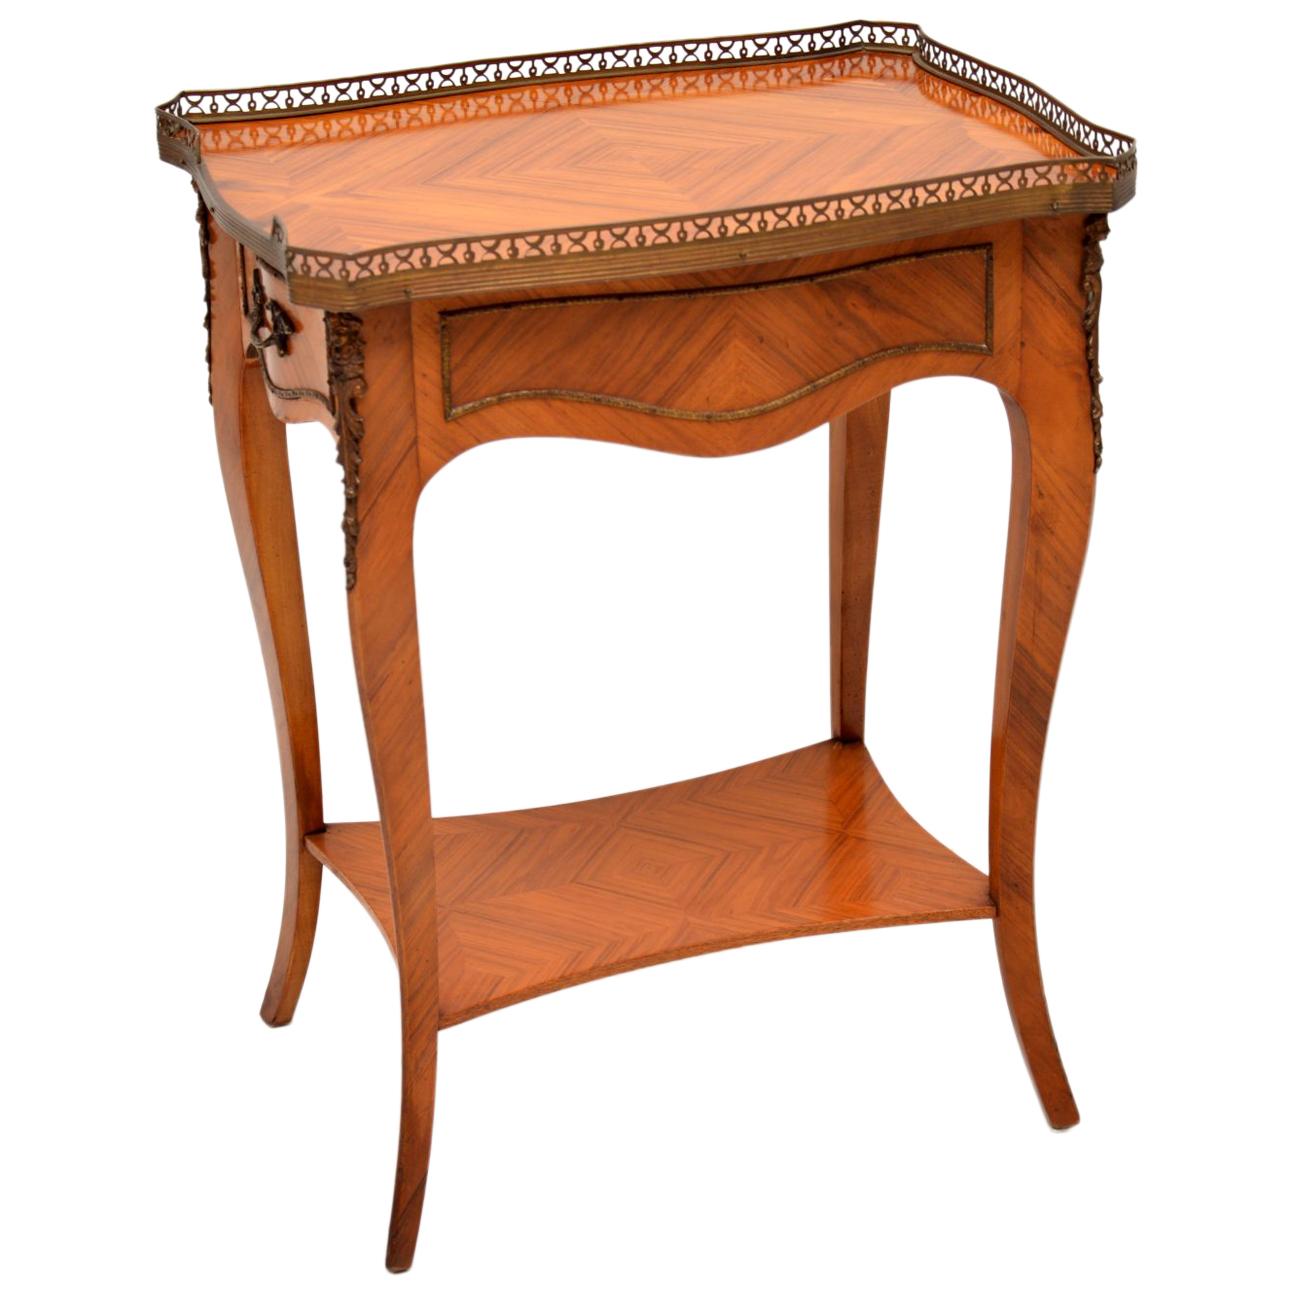 Antique French Louis XV style king wood side table in excellent condition and dating to circa 1950s period. It’s in excellent condition having just been French polished and the king wood veneers have some lovely patterns. This table is paneled all